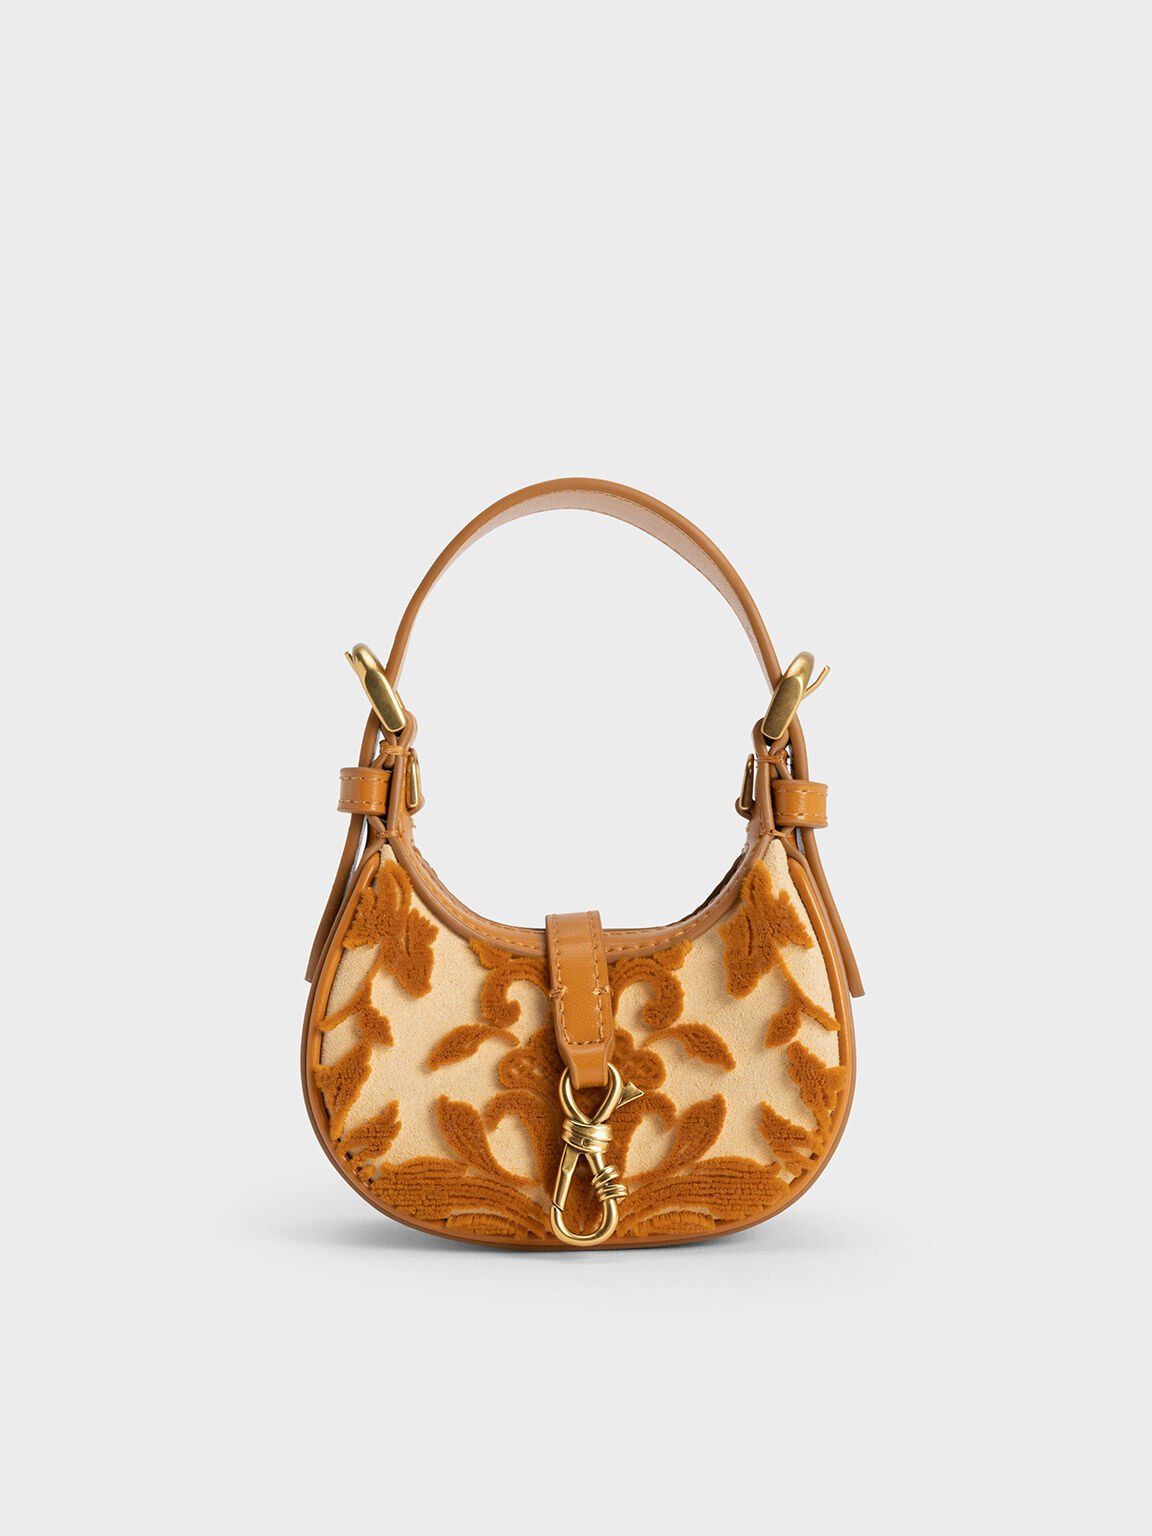 Bolso Micro Thessaly con Detalles Florales, Beige, hi-res